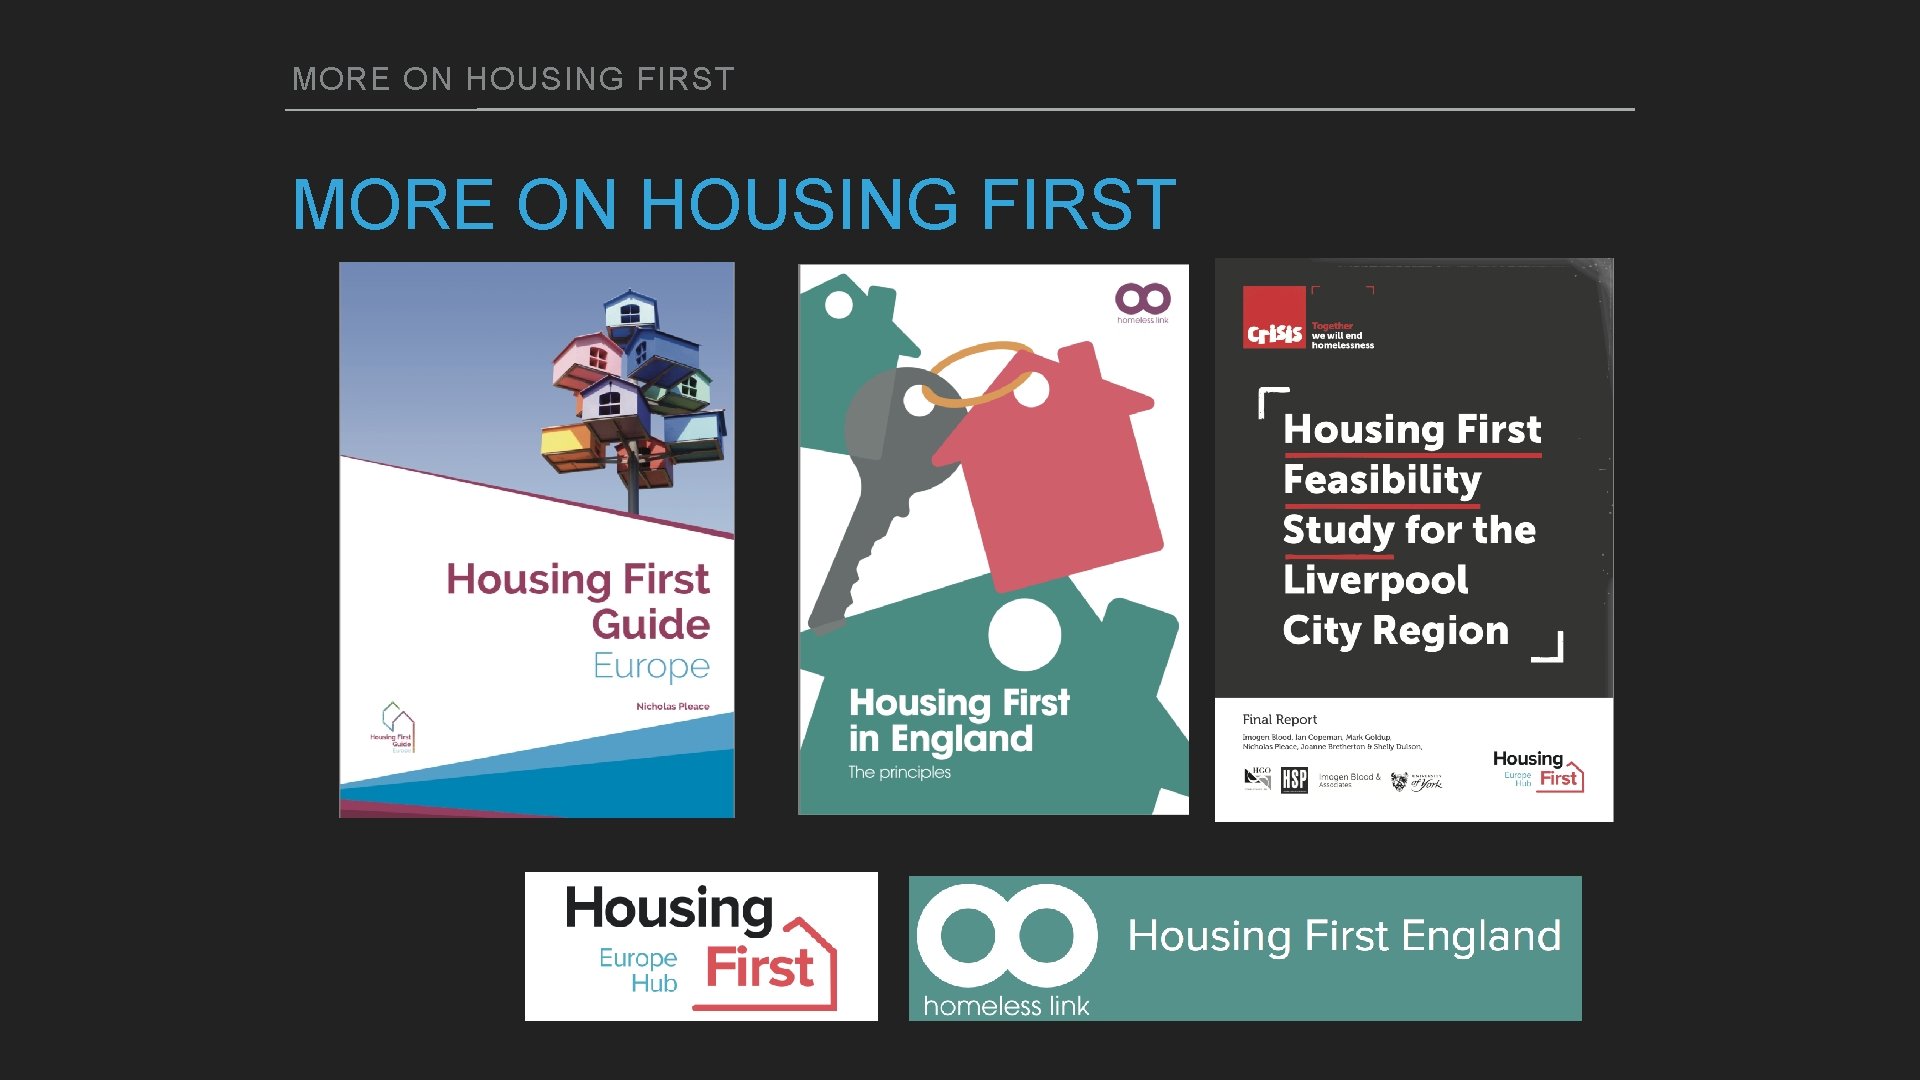 MORE ON HOUSING FIRST 